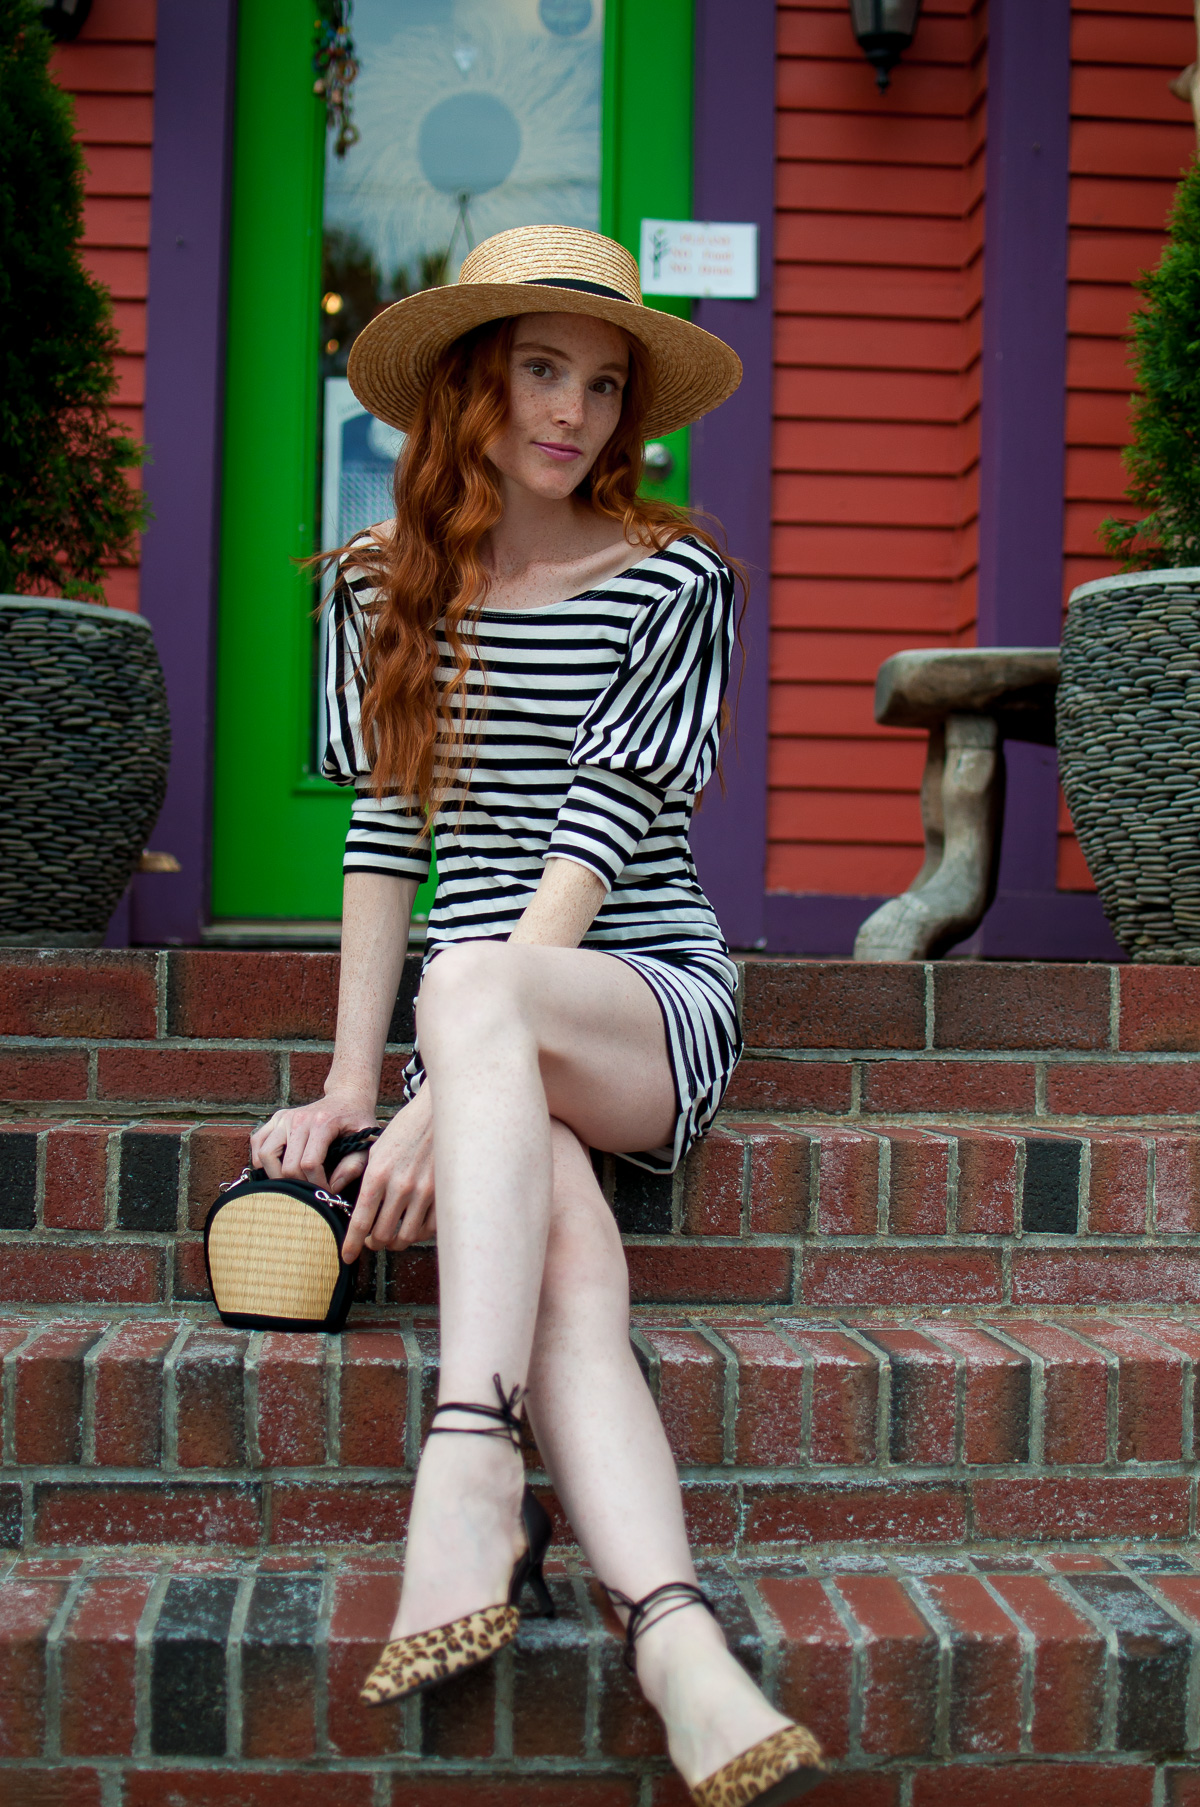 Summer dress and straw boater hat while traveling in New England 